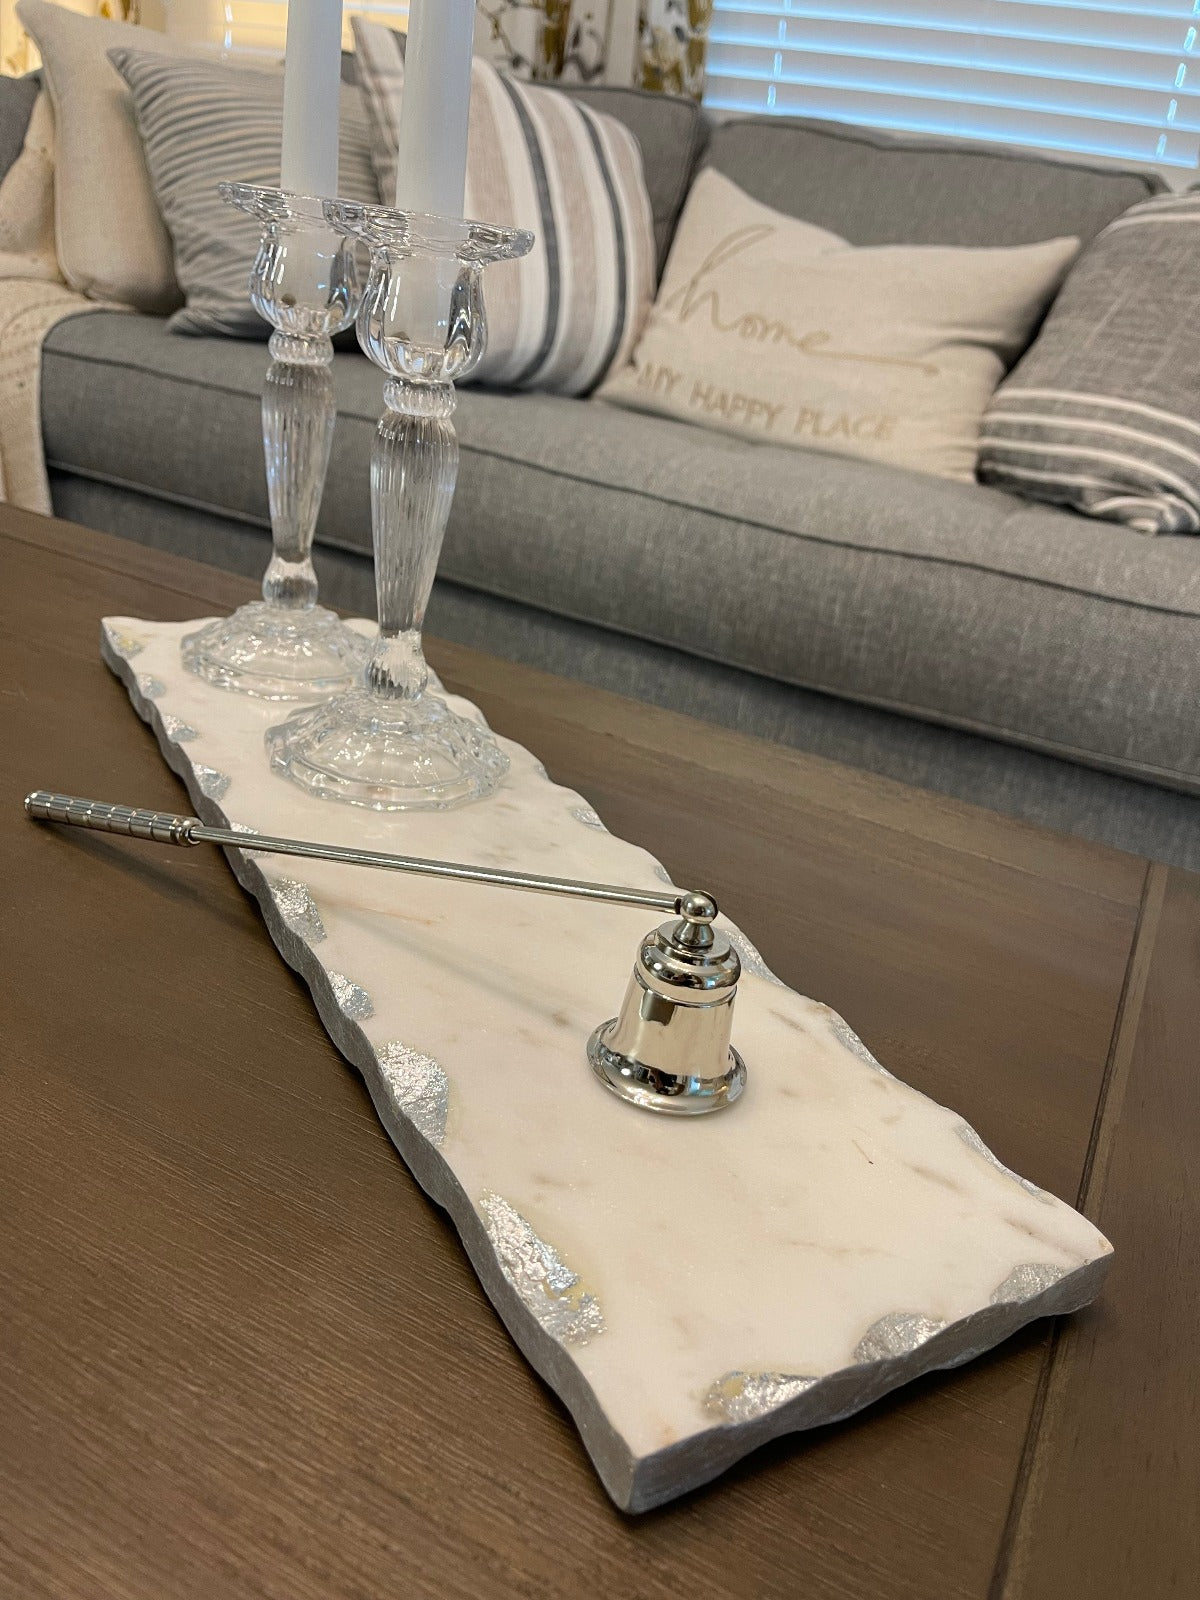 18L x 5W Oblong Marble Decorative Tray with Silver Metallic Edge Displayed with Candle Holders.